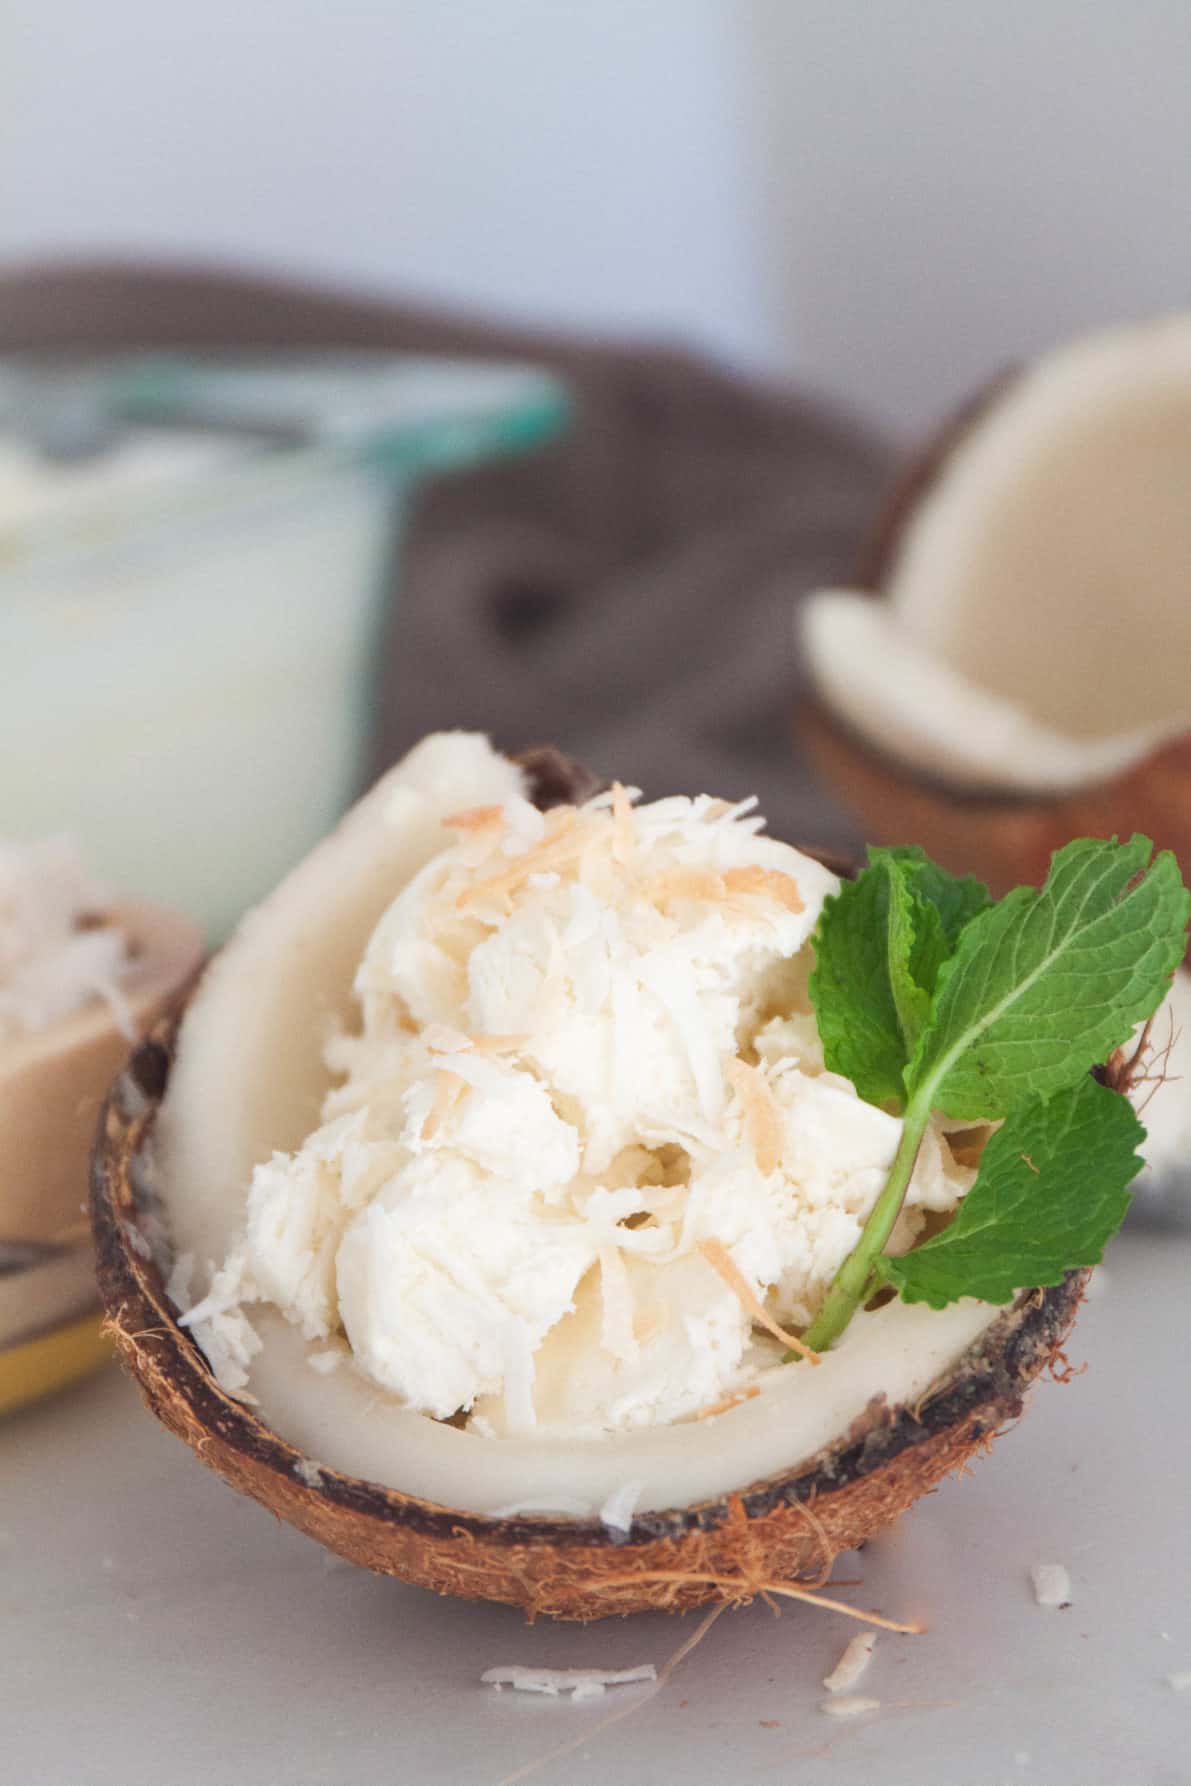 No Churn Creamy Coconut Ice Cream - Sweet, creamy, coconutty. This no churn coconut ice cream is simply delightful and is a cinch to make. And you don't even need to have an ice cream maker! | wanderzestblog.com